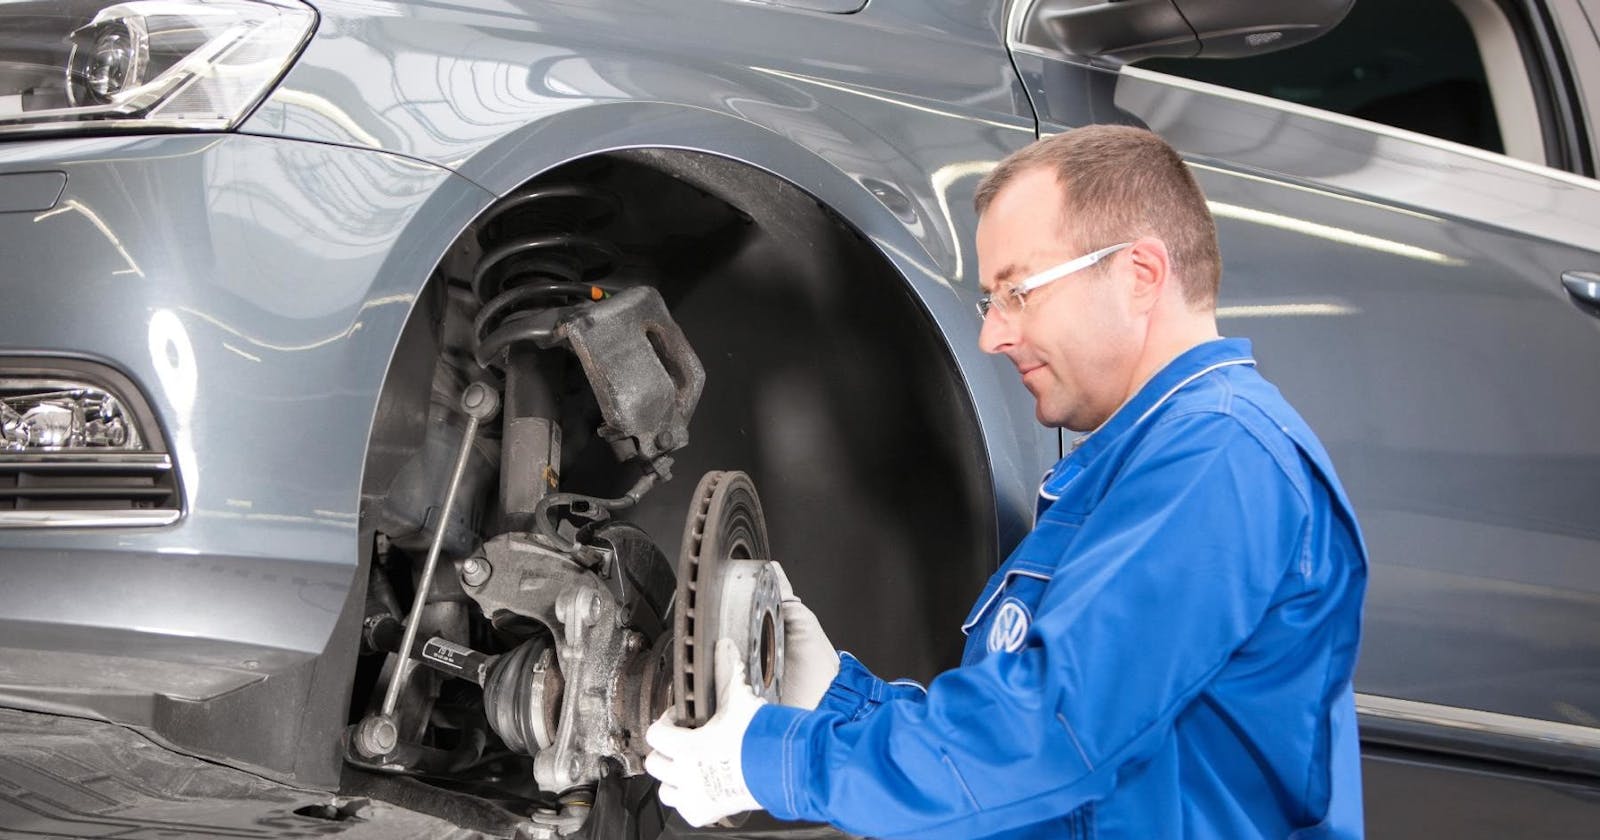 Brake Repair in Maidstone: Ensuring Your Safety on the Road